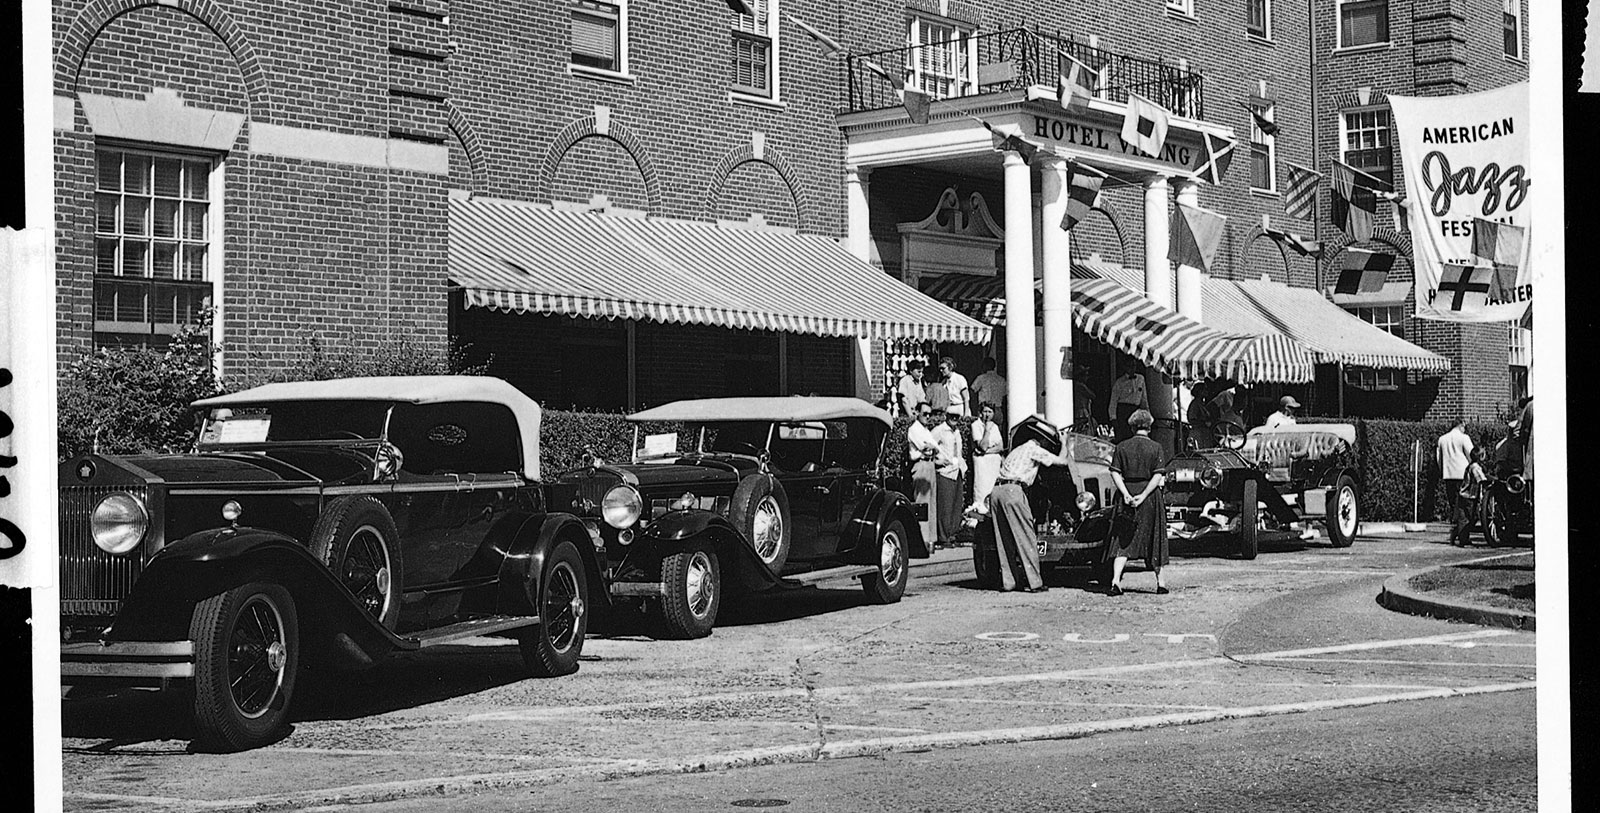 Historic Image of Exterior of The Hotel Viking, 1926, Member of Historic Hotels of America, in Newport, Rhode Island, Discover